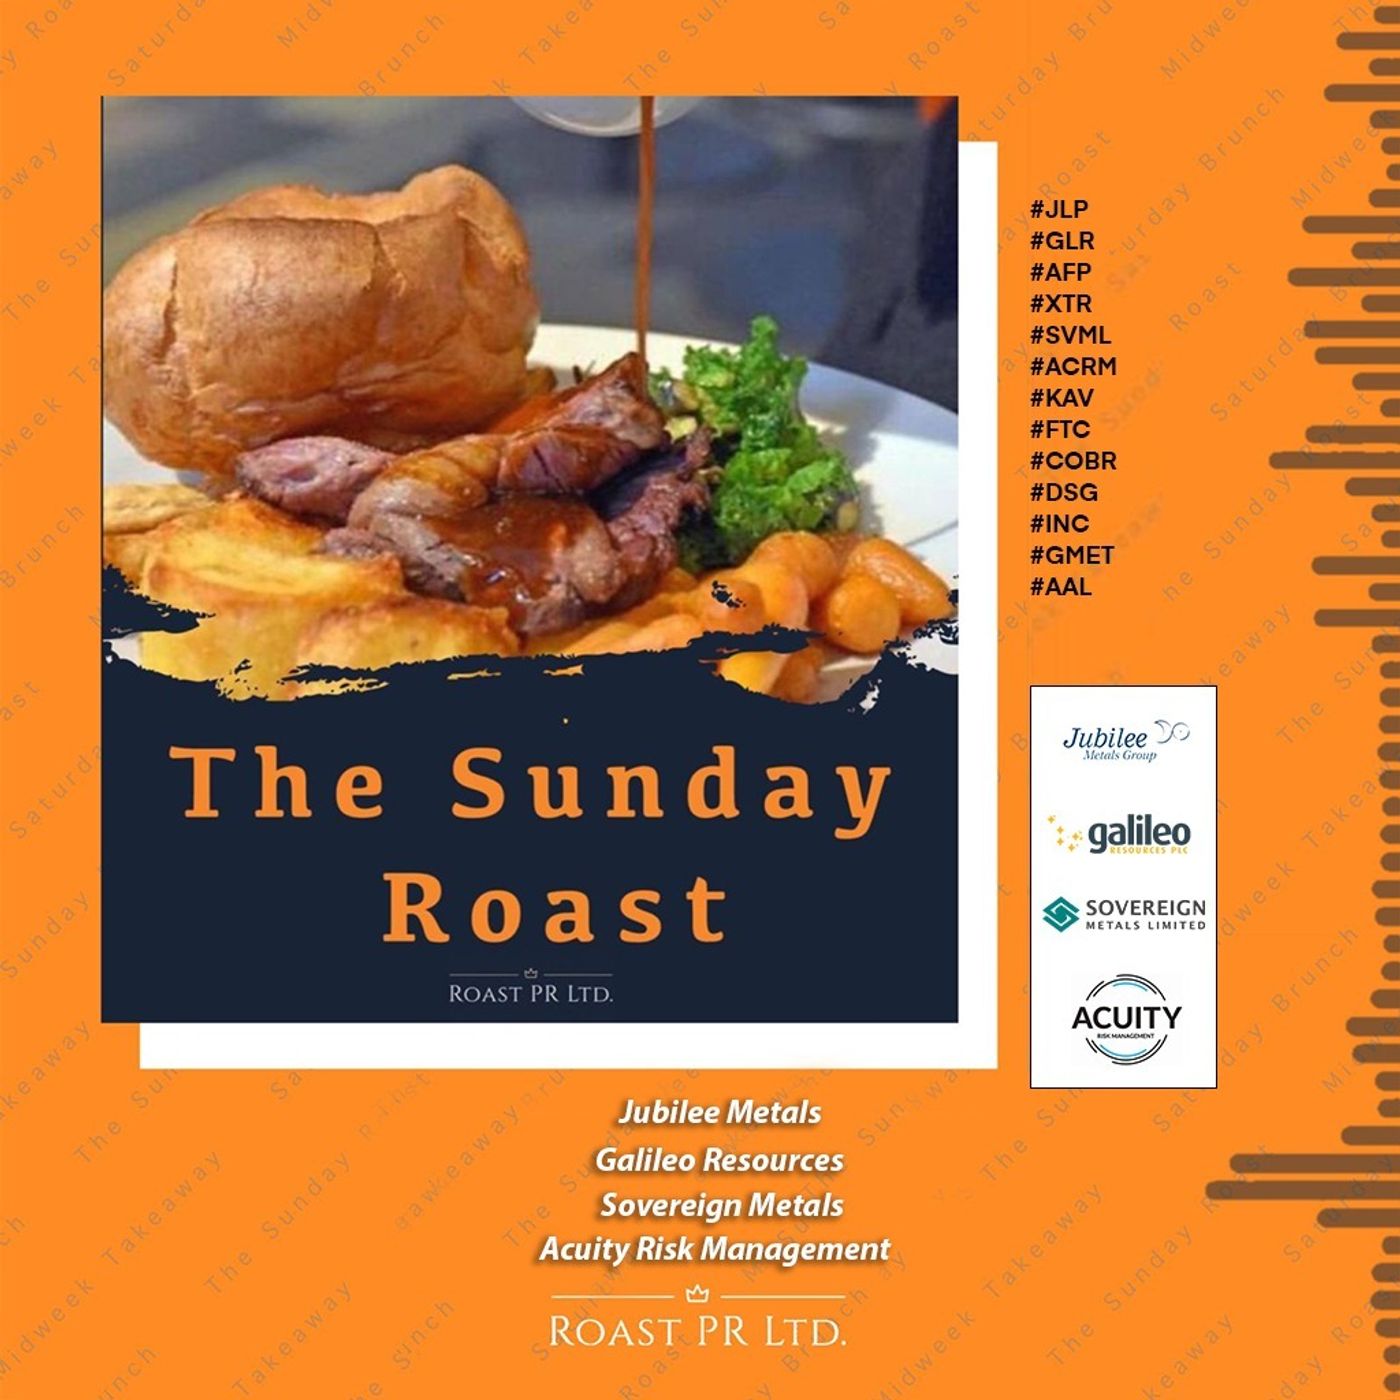 S8 Ep5: Sunday Roast featuring Jubilee Metals, Galileo Resources, Sovereign Metals and Acuity Risk Management #JLP #GLR #AFP #XTR #SVML #ACRM #KAV #FTC #COBR #DSG #INC #GMET #AAL